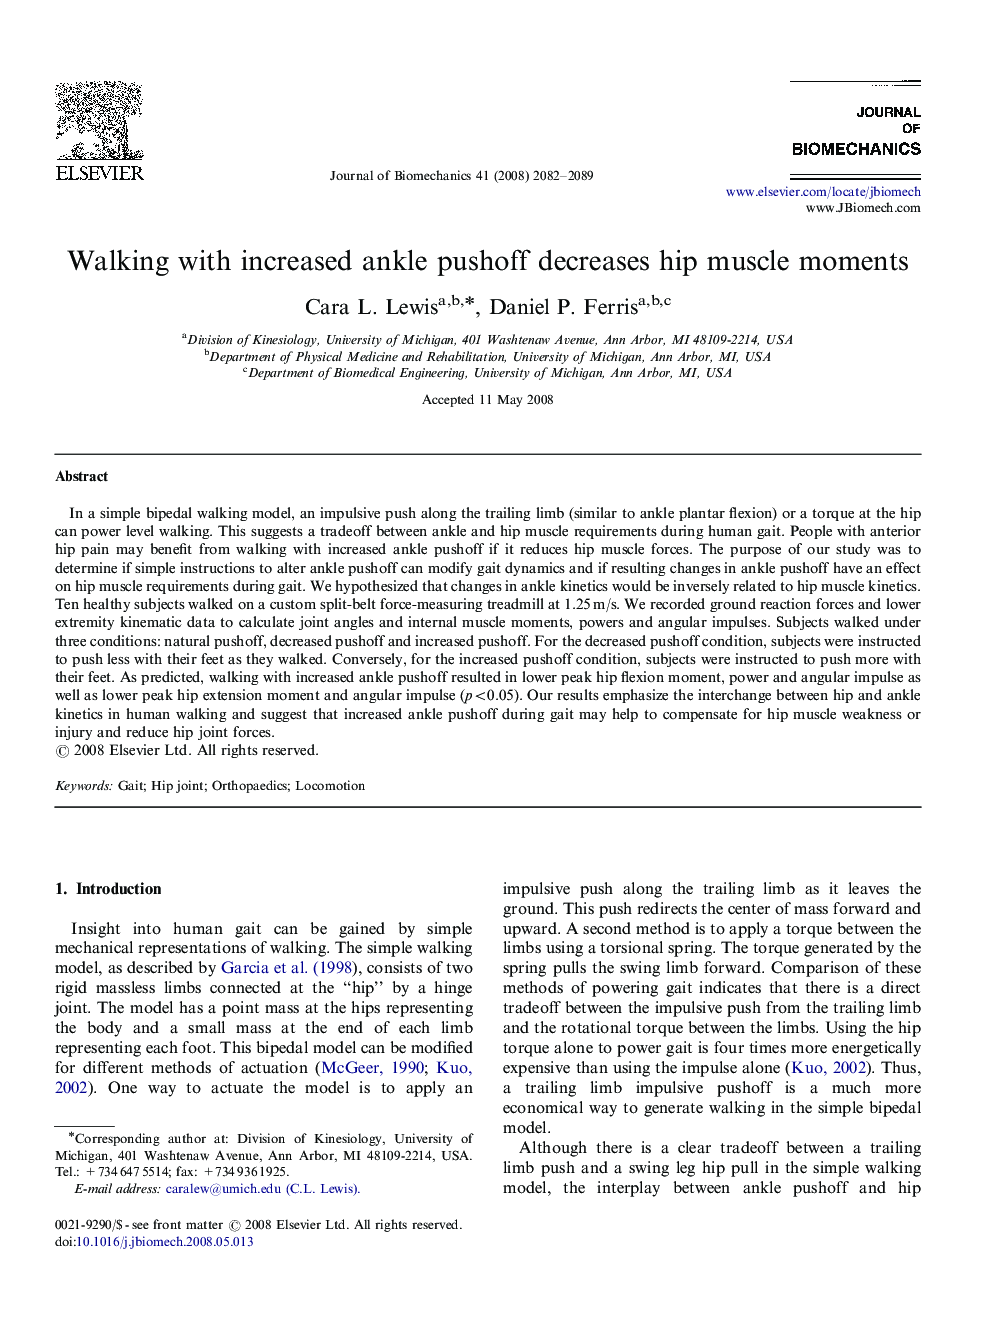 Walking with increased ankle pushoff decreases hip muscle moments